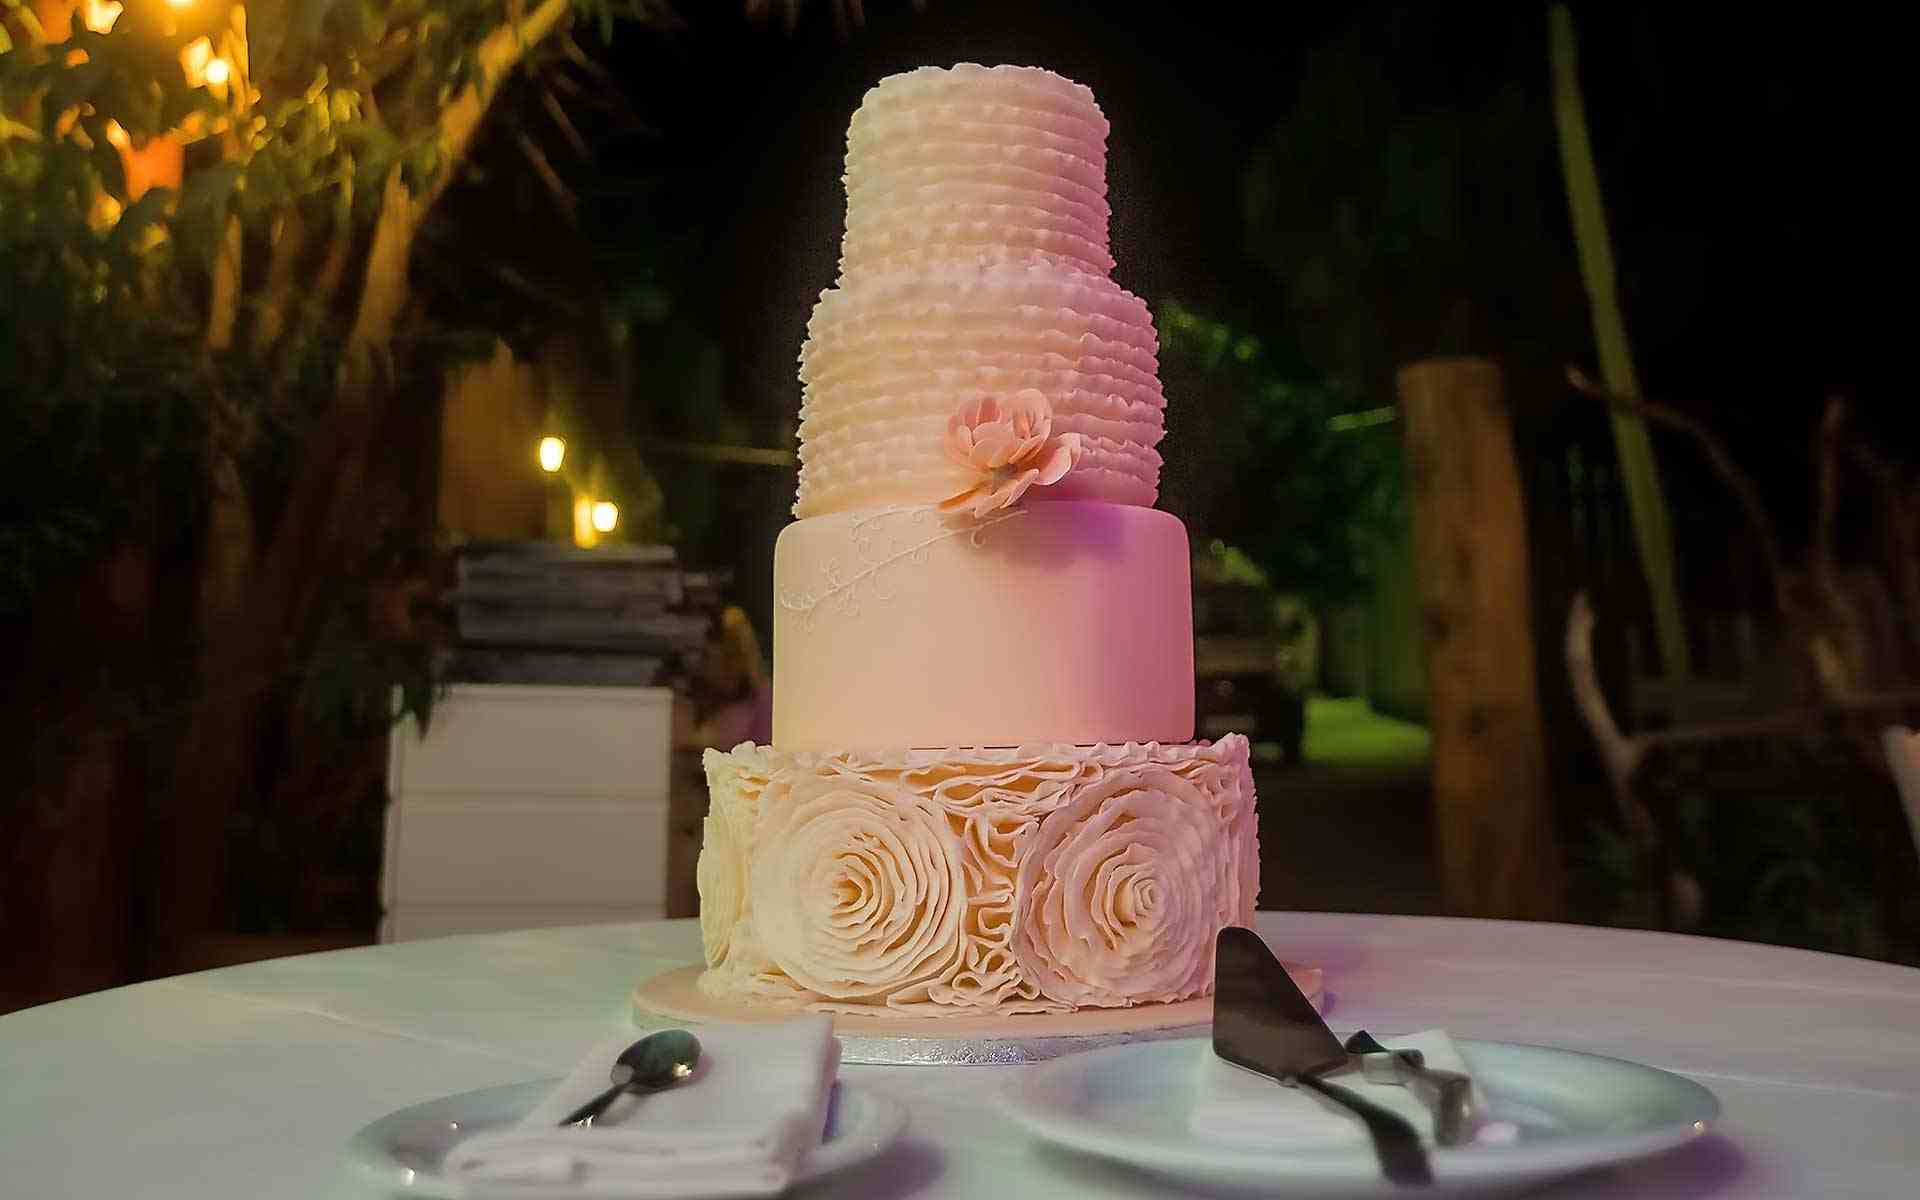 Gorgeous-And-Delicious-Wedding-Cake-by-Diamond-Events-Wedding-Event-planning-services